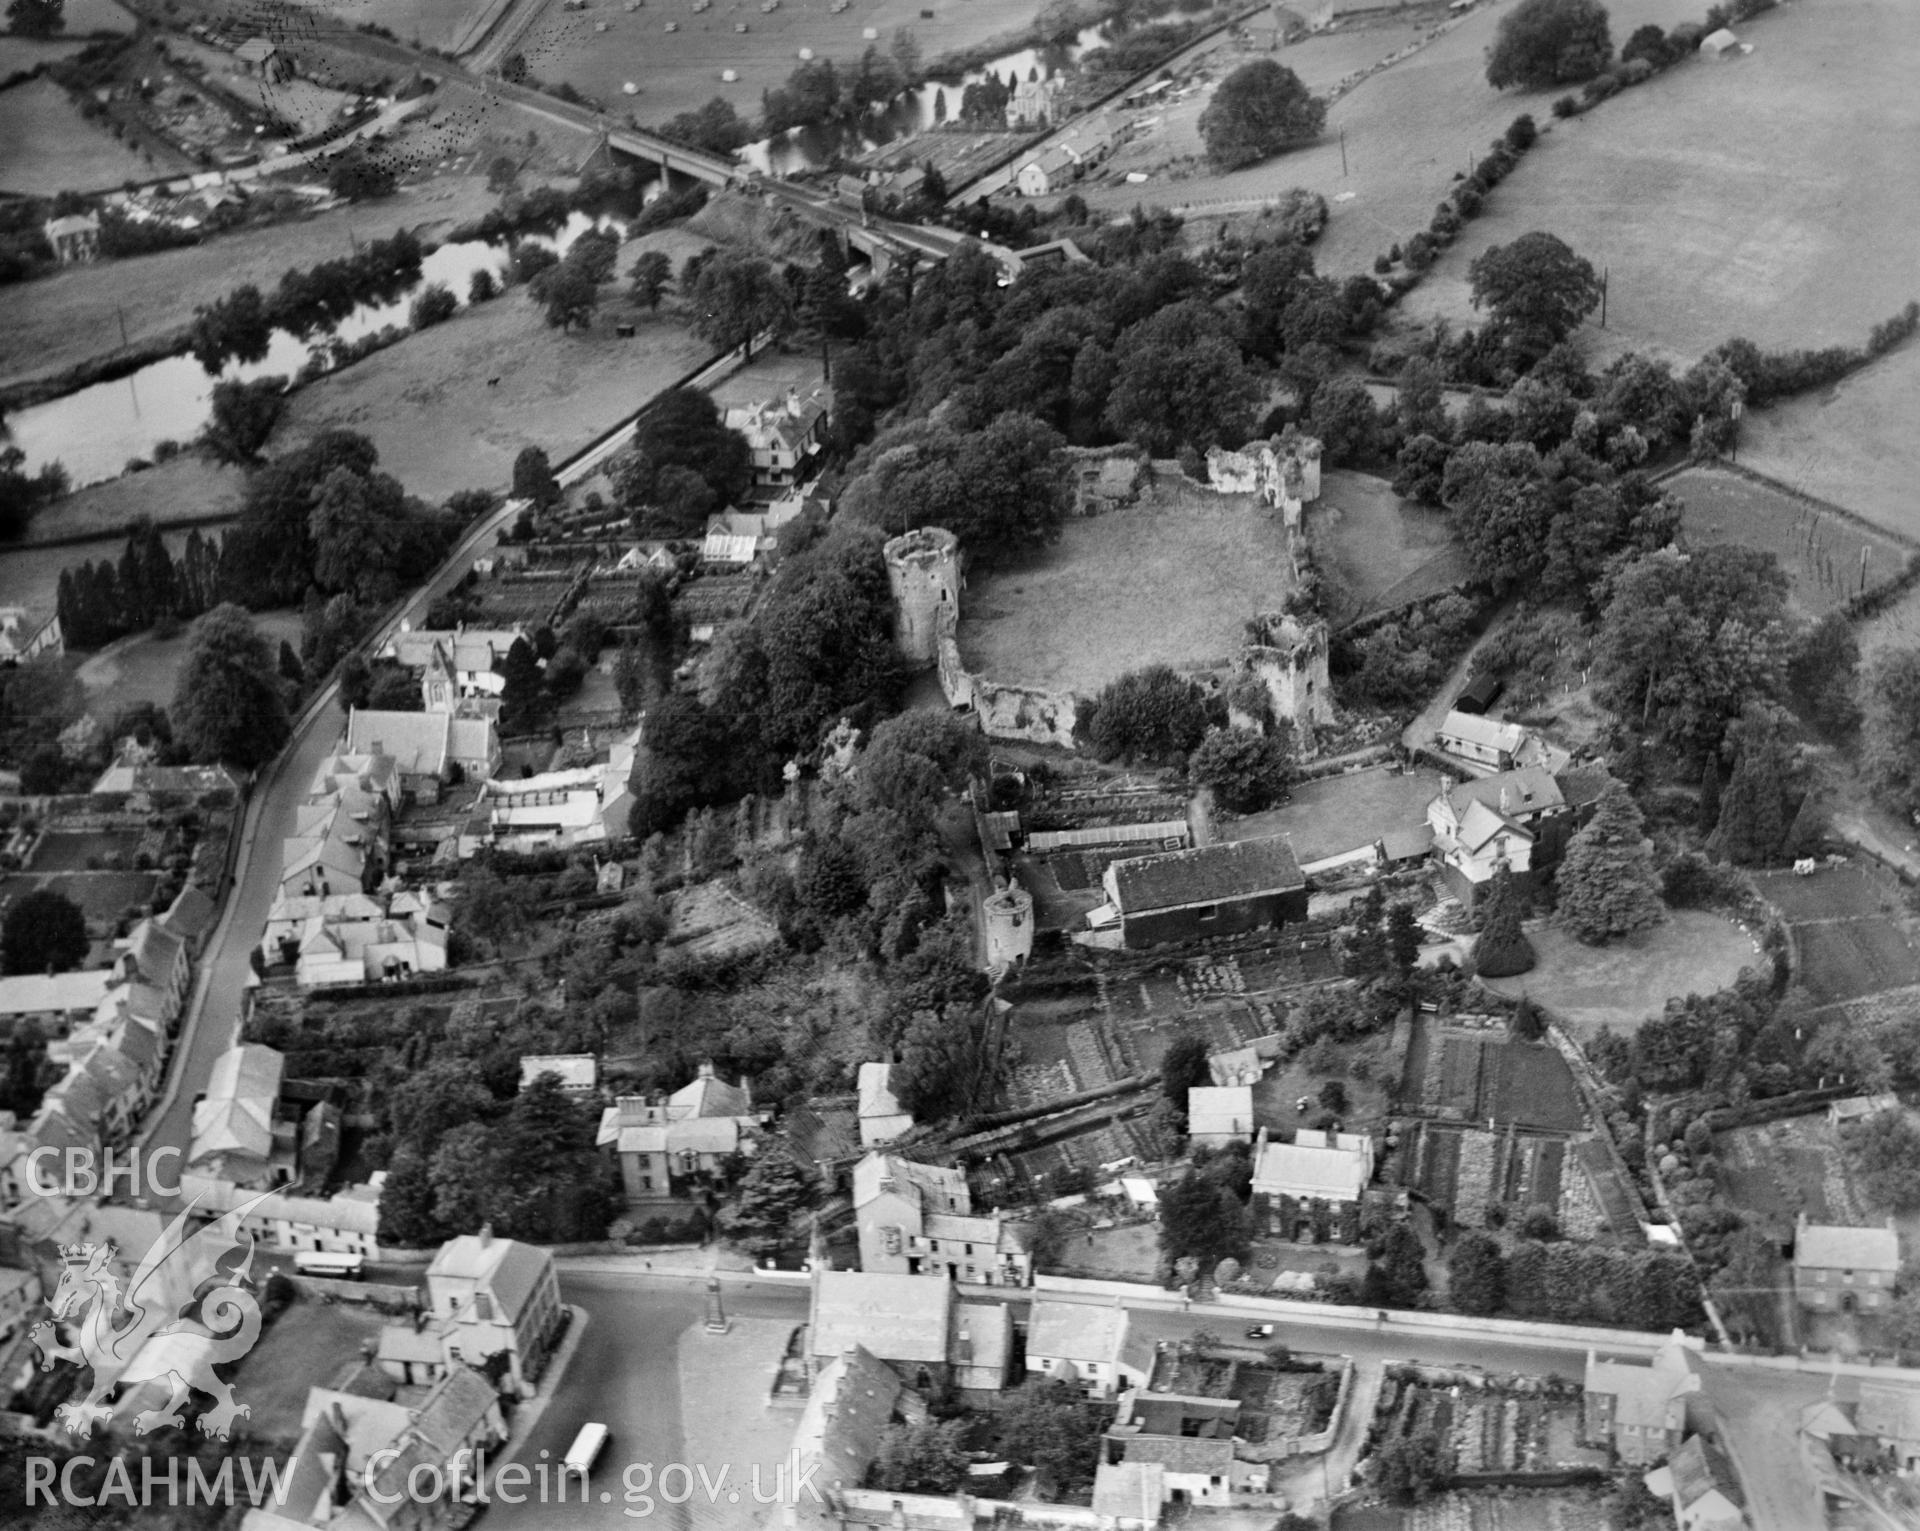 General view of Usk, oblique aerial view. 5?x4? black and white glass plate negative.